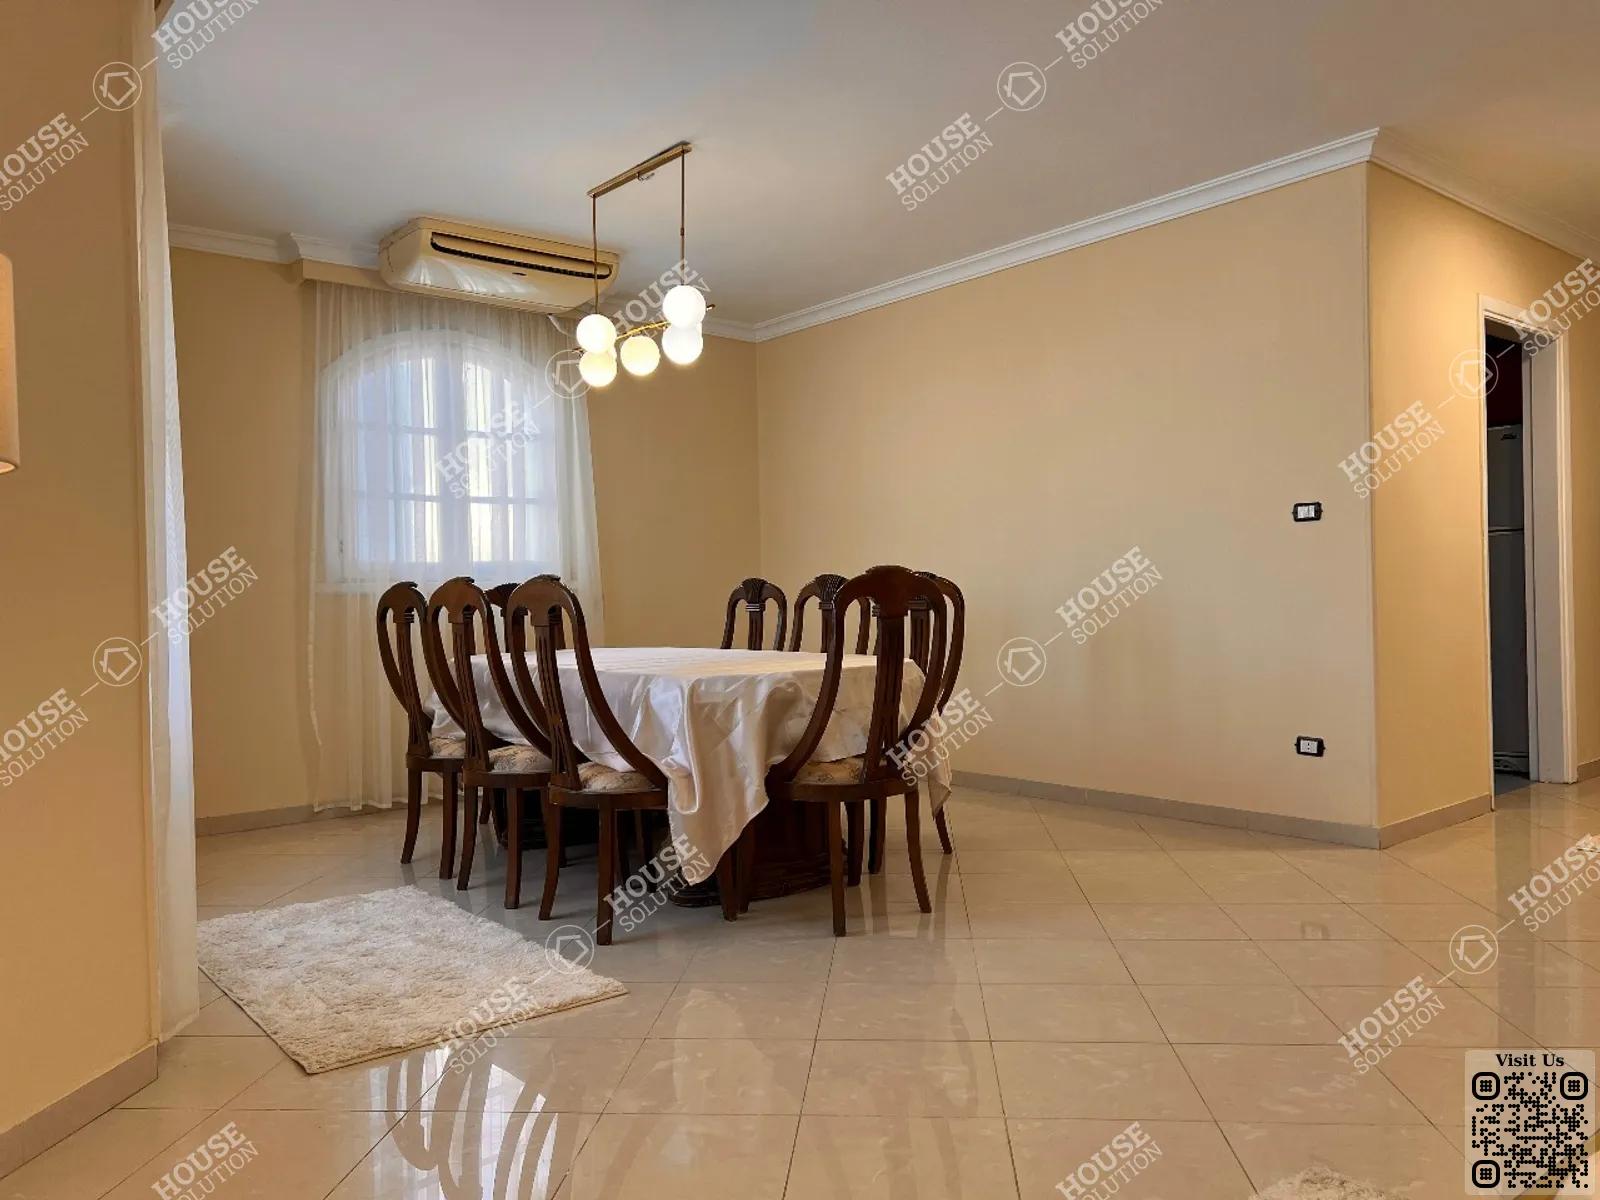 DINING AREA @ Apartments For Rent In Maadi Maadi Degla Area: 185 m² consists of 3 Bedrooms 2 Bathrooms Modern furnished 5 stars #5880-2